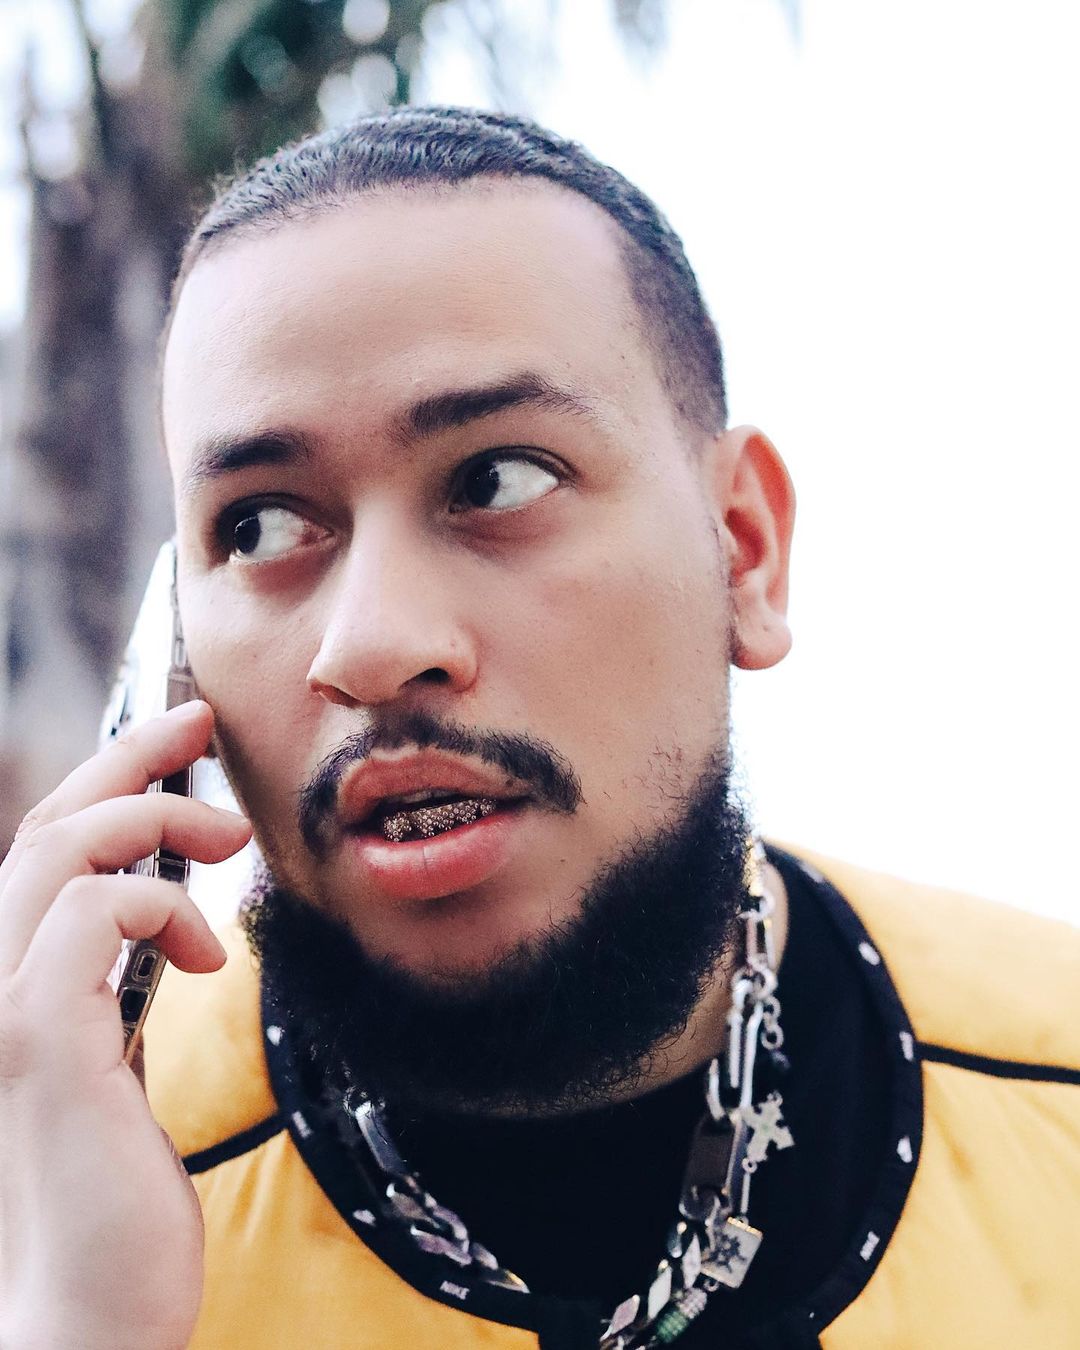 AKA drops two snippets to his new album called MassCountry